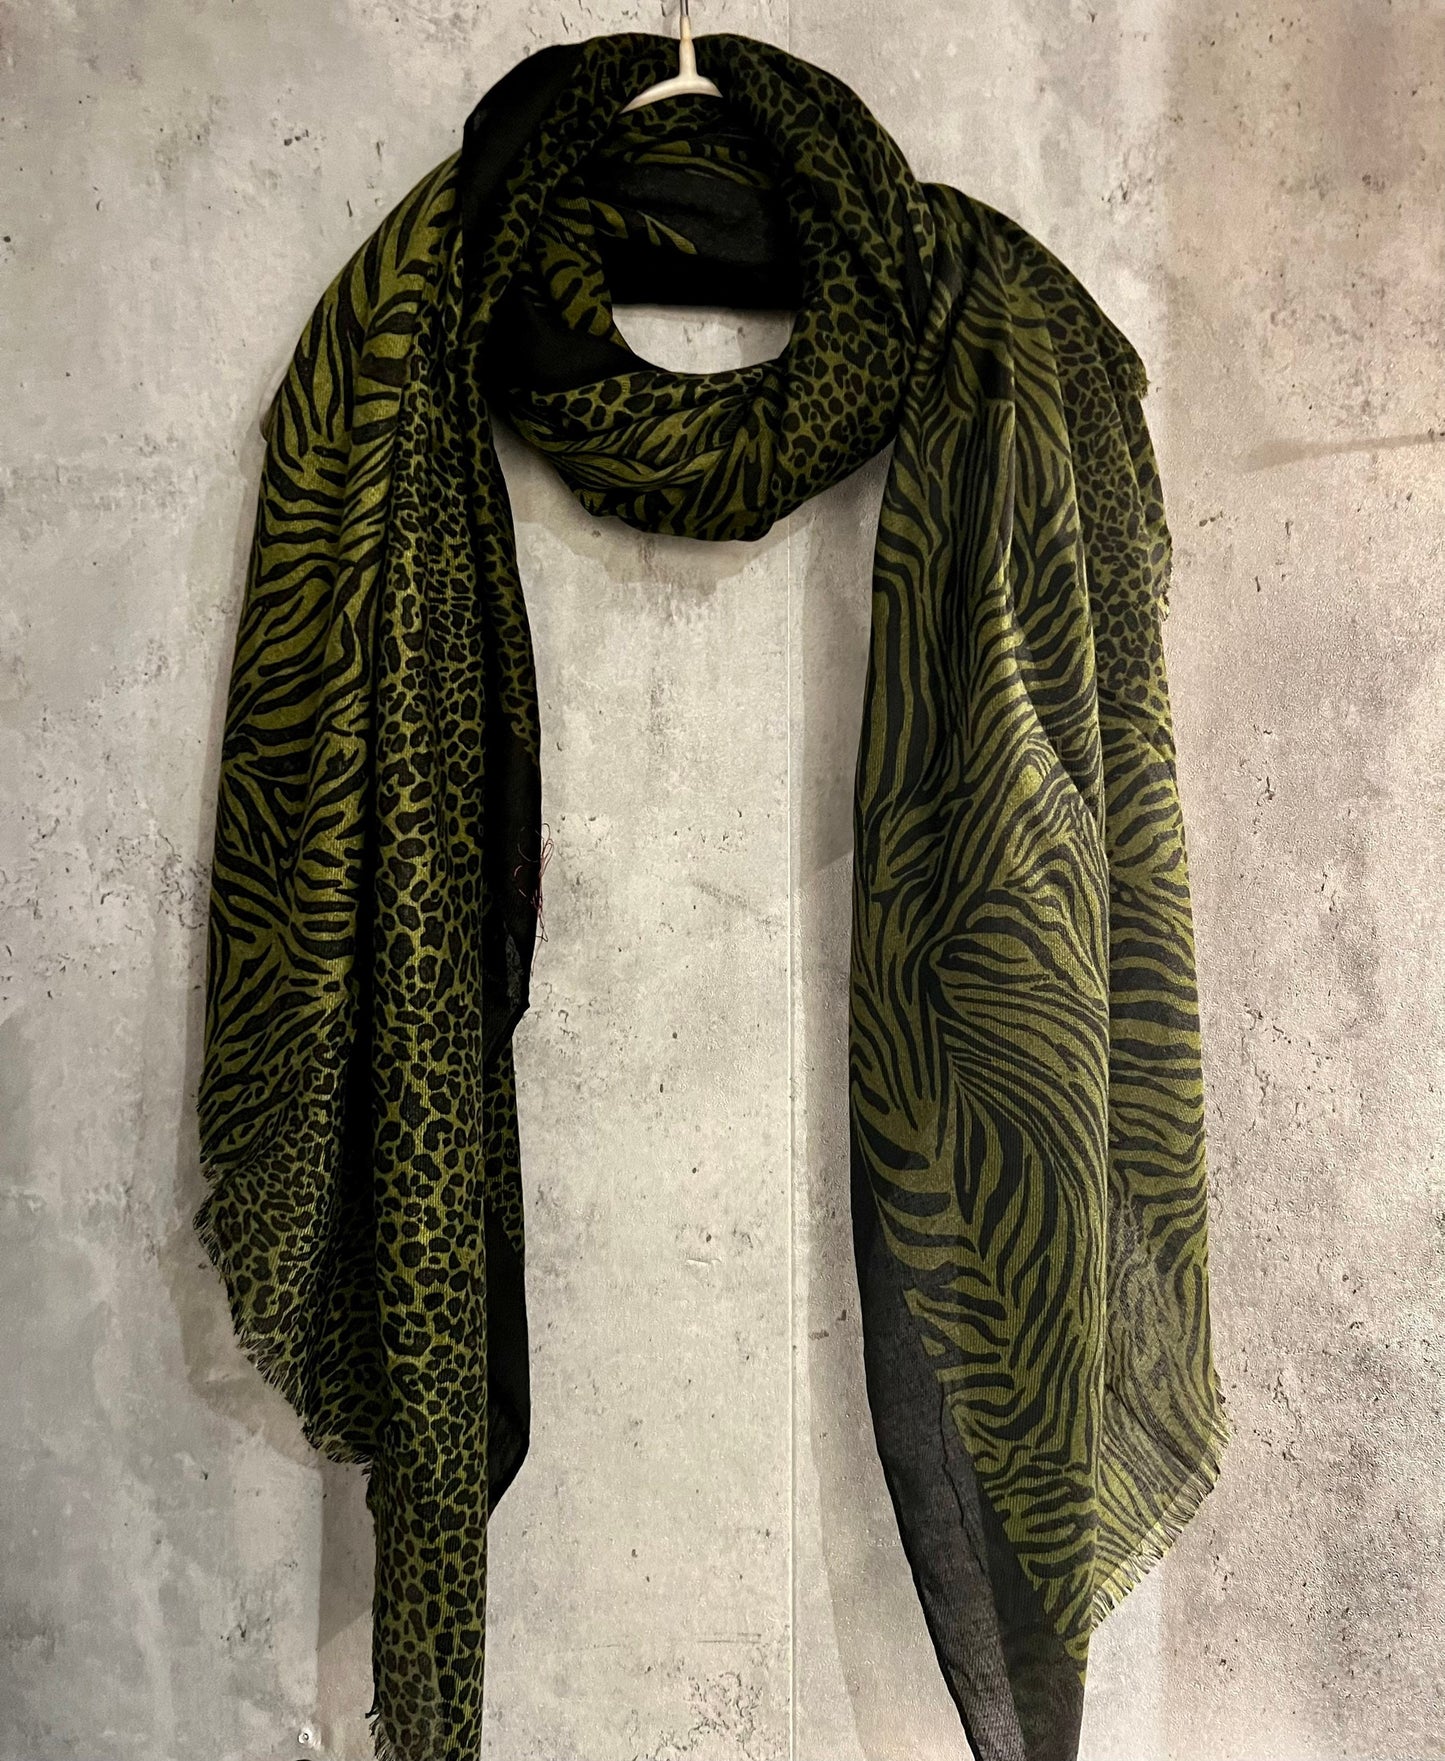 Micro Leopard X Zebra Pattern Pattern Olive Green Cotton Scarf/Summer Autumn Winter Women Scarf/Gifts For Her Birthday Christmas/UK Seller